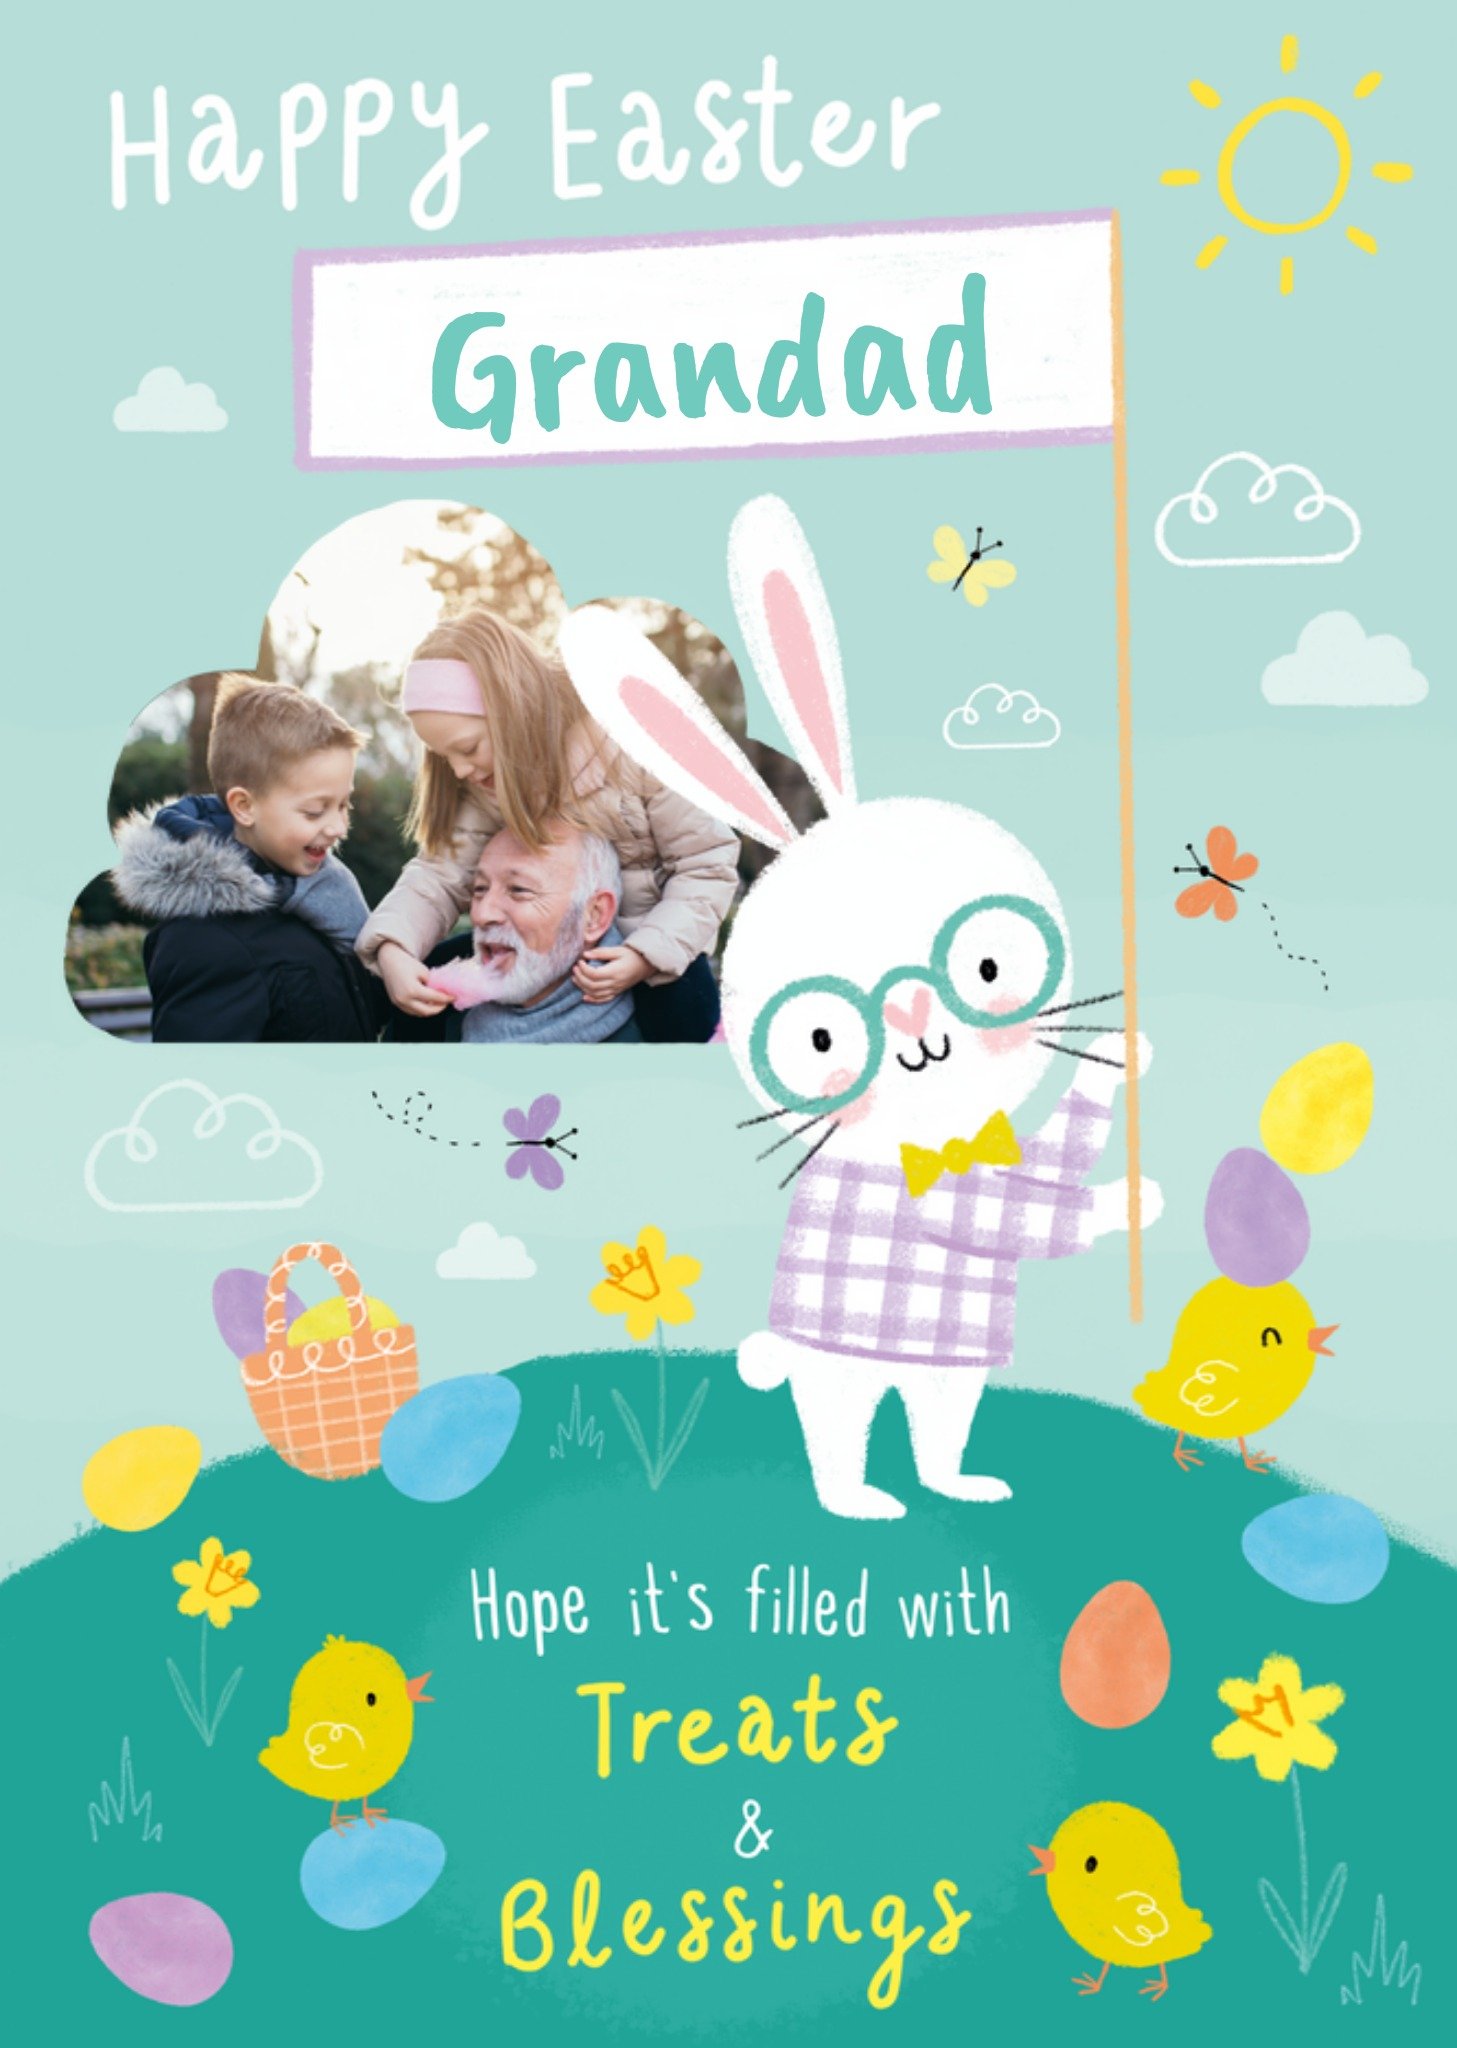 Moonpig Millicent Venton Happy Easter Grandad Hope It's Filled With Treats And Blessings Photo Uploa